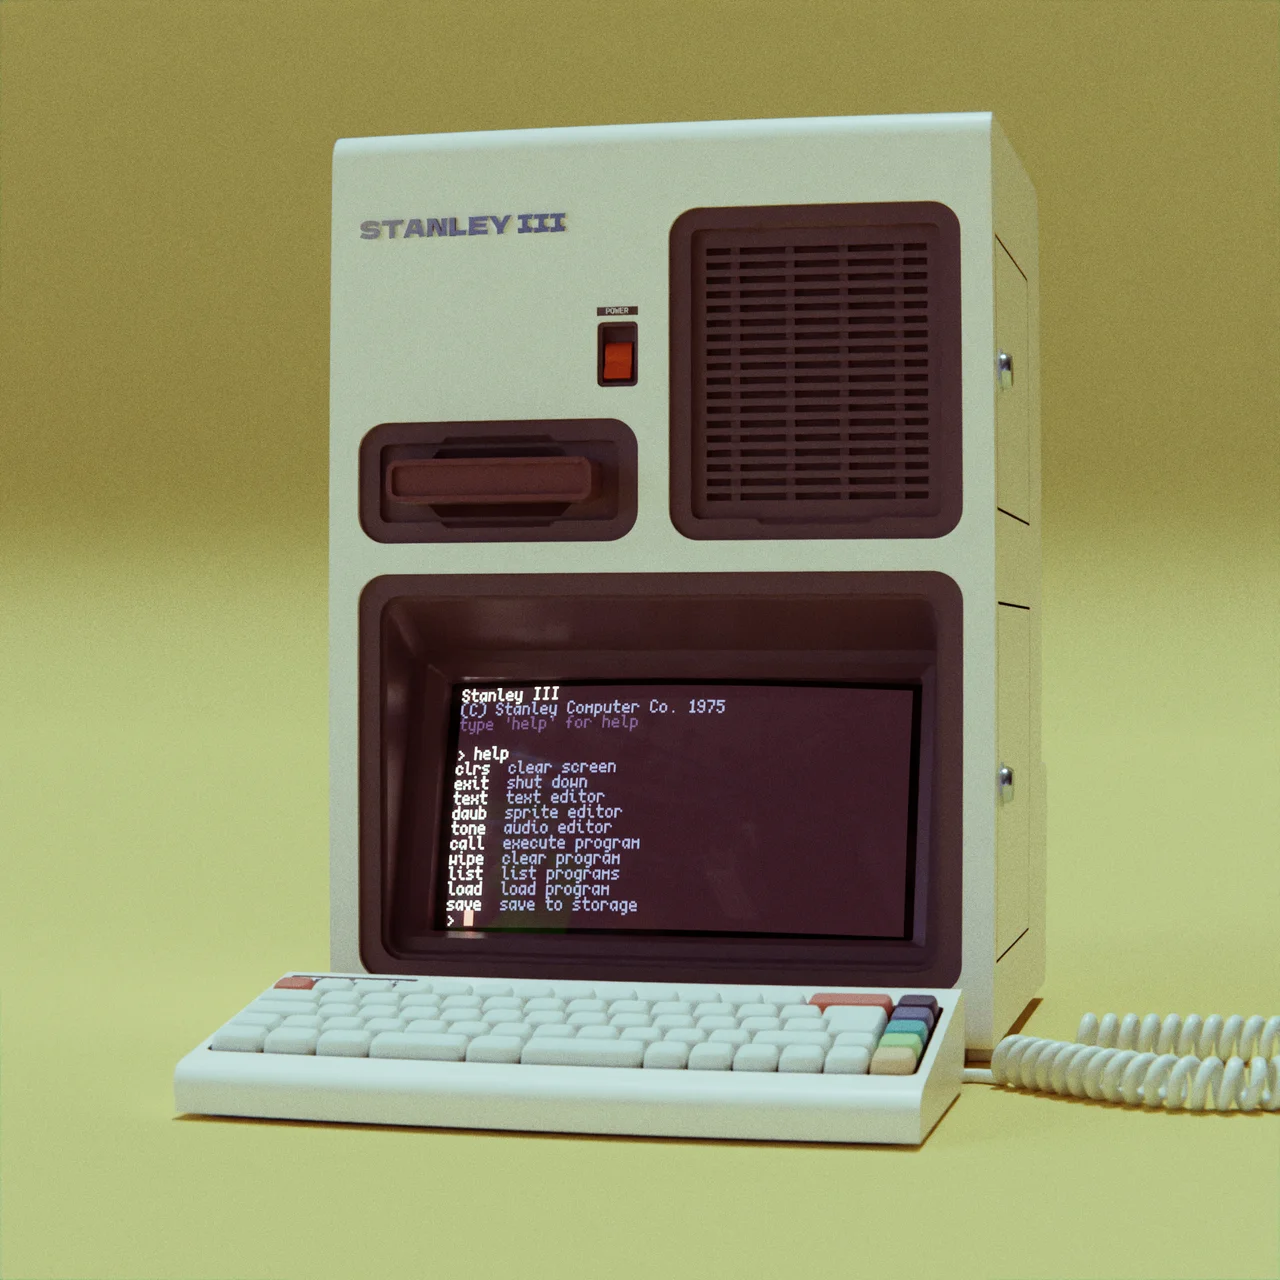 A 3D render of the fictional Stanley computer, in an exaggerated 1980s style sitting in a yellow studio backdrop.